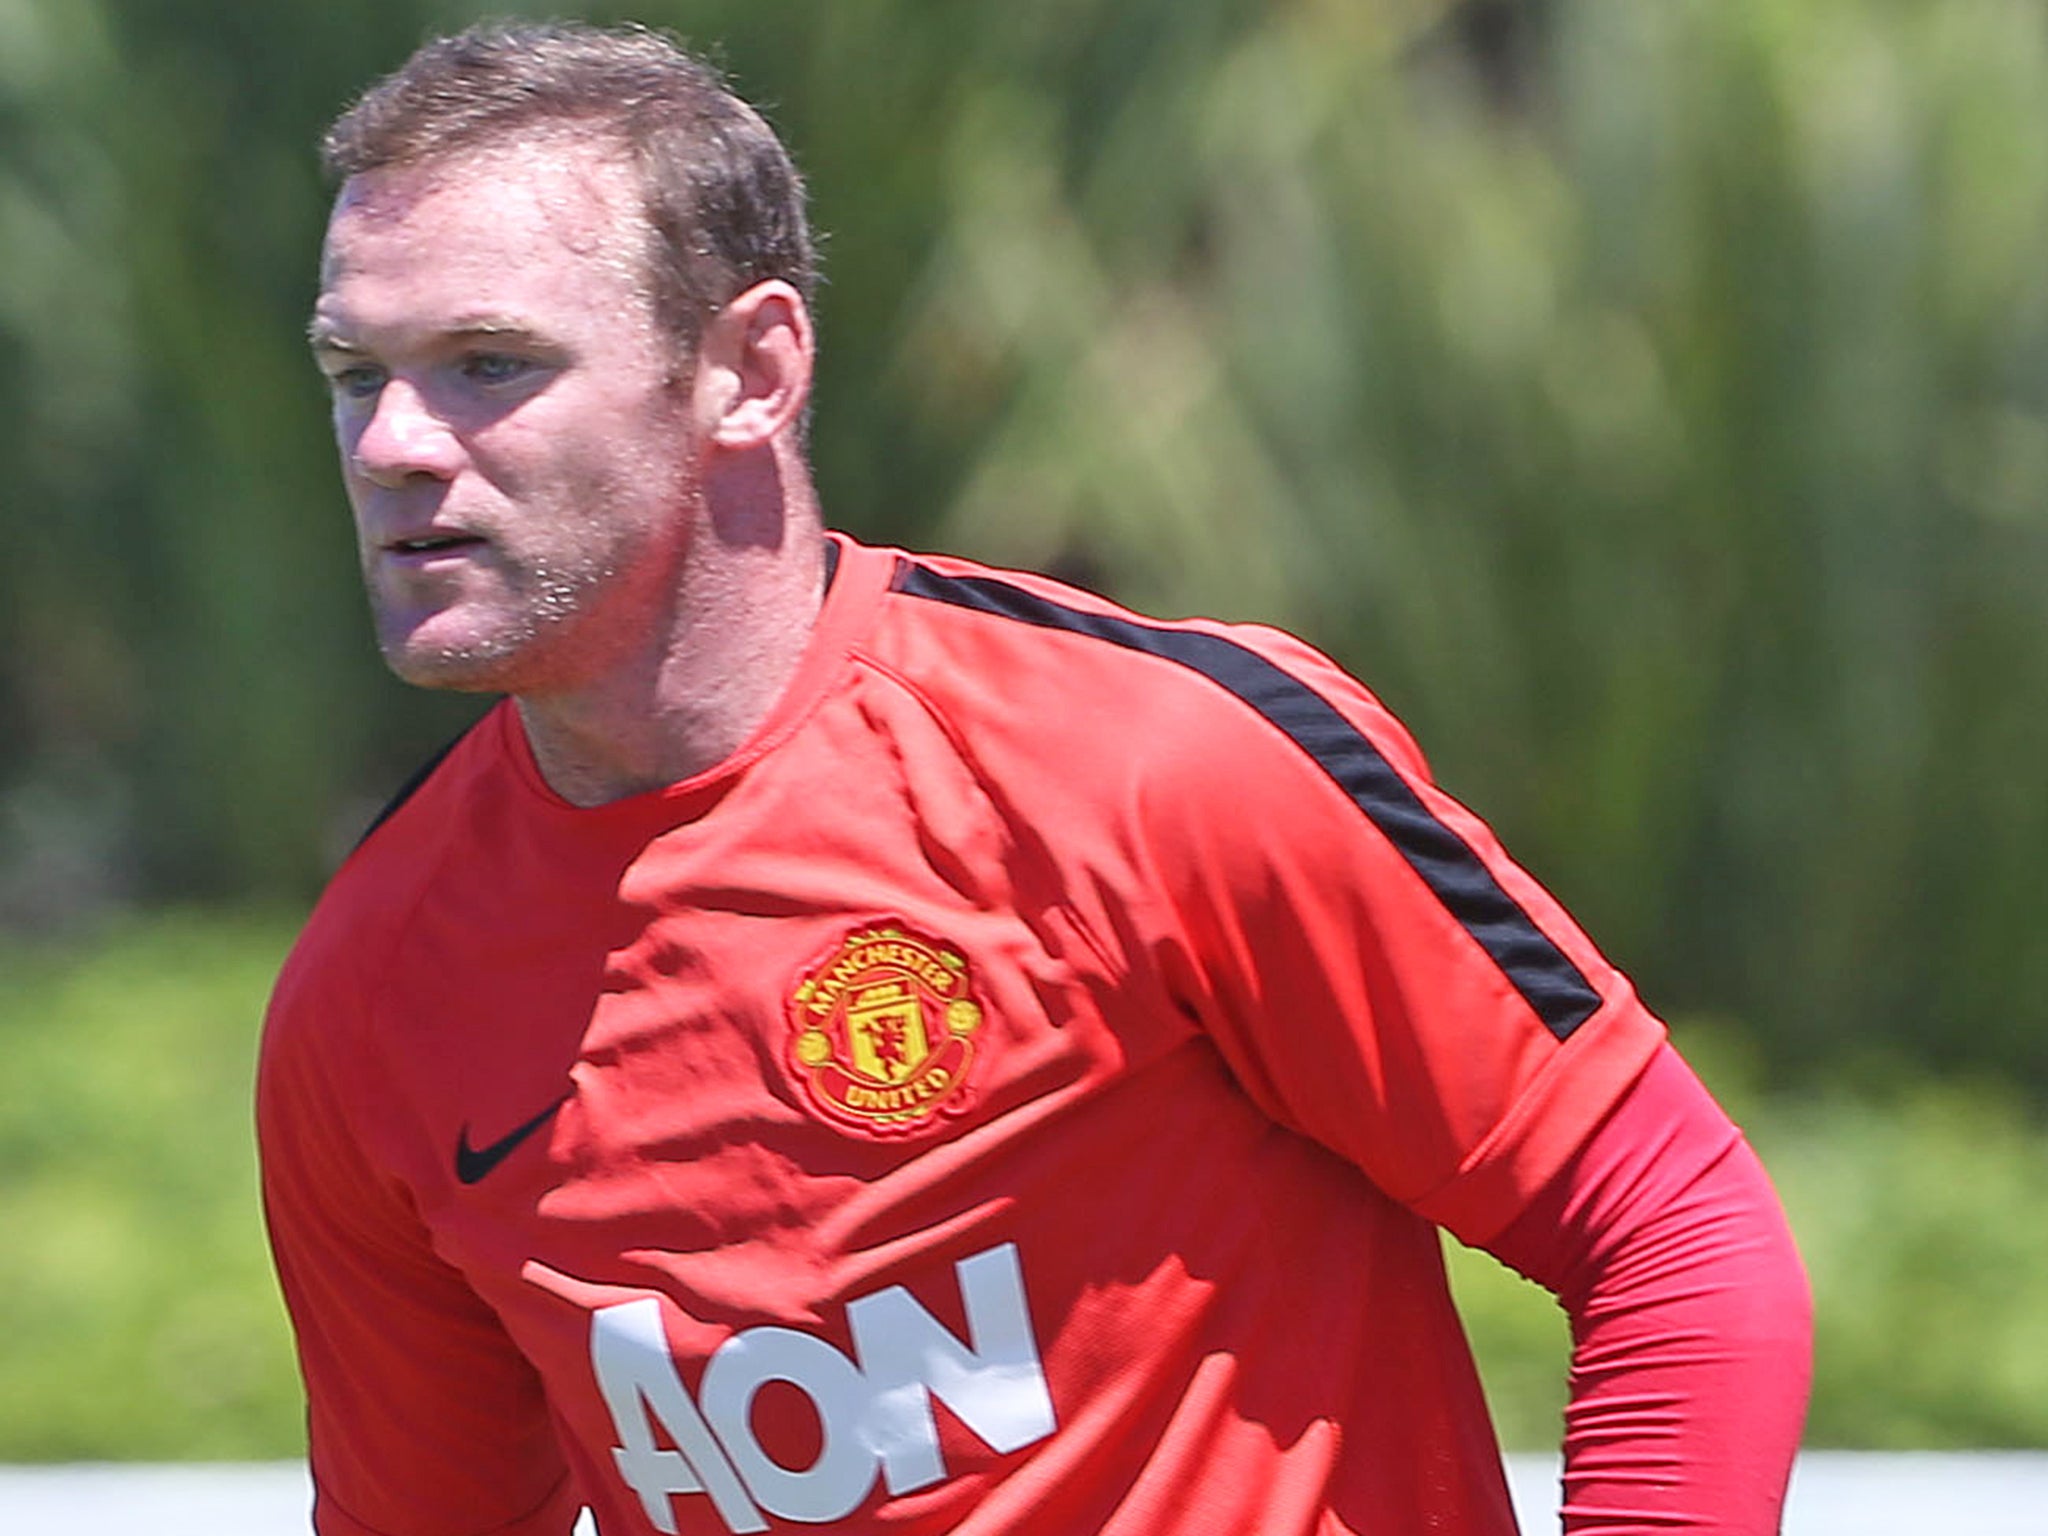 Wayne Rooney will see action against LA Galaxy